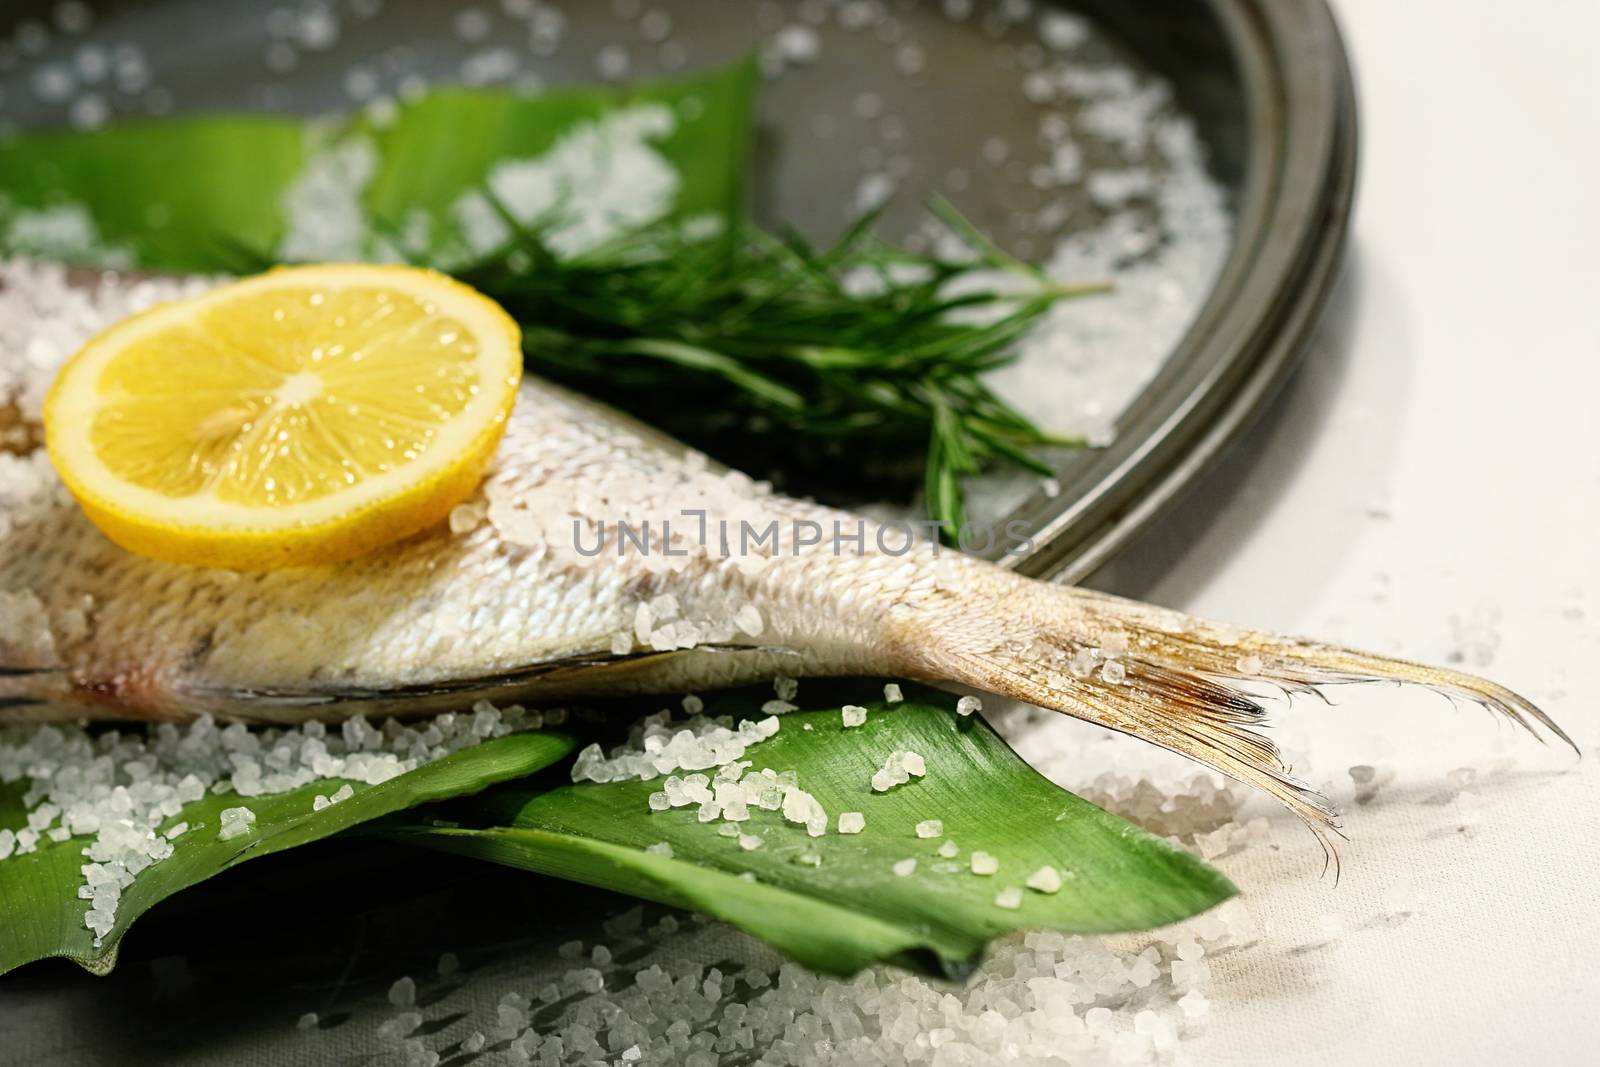 Fish tale with lemon, salt and herbs by Sandralise